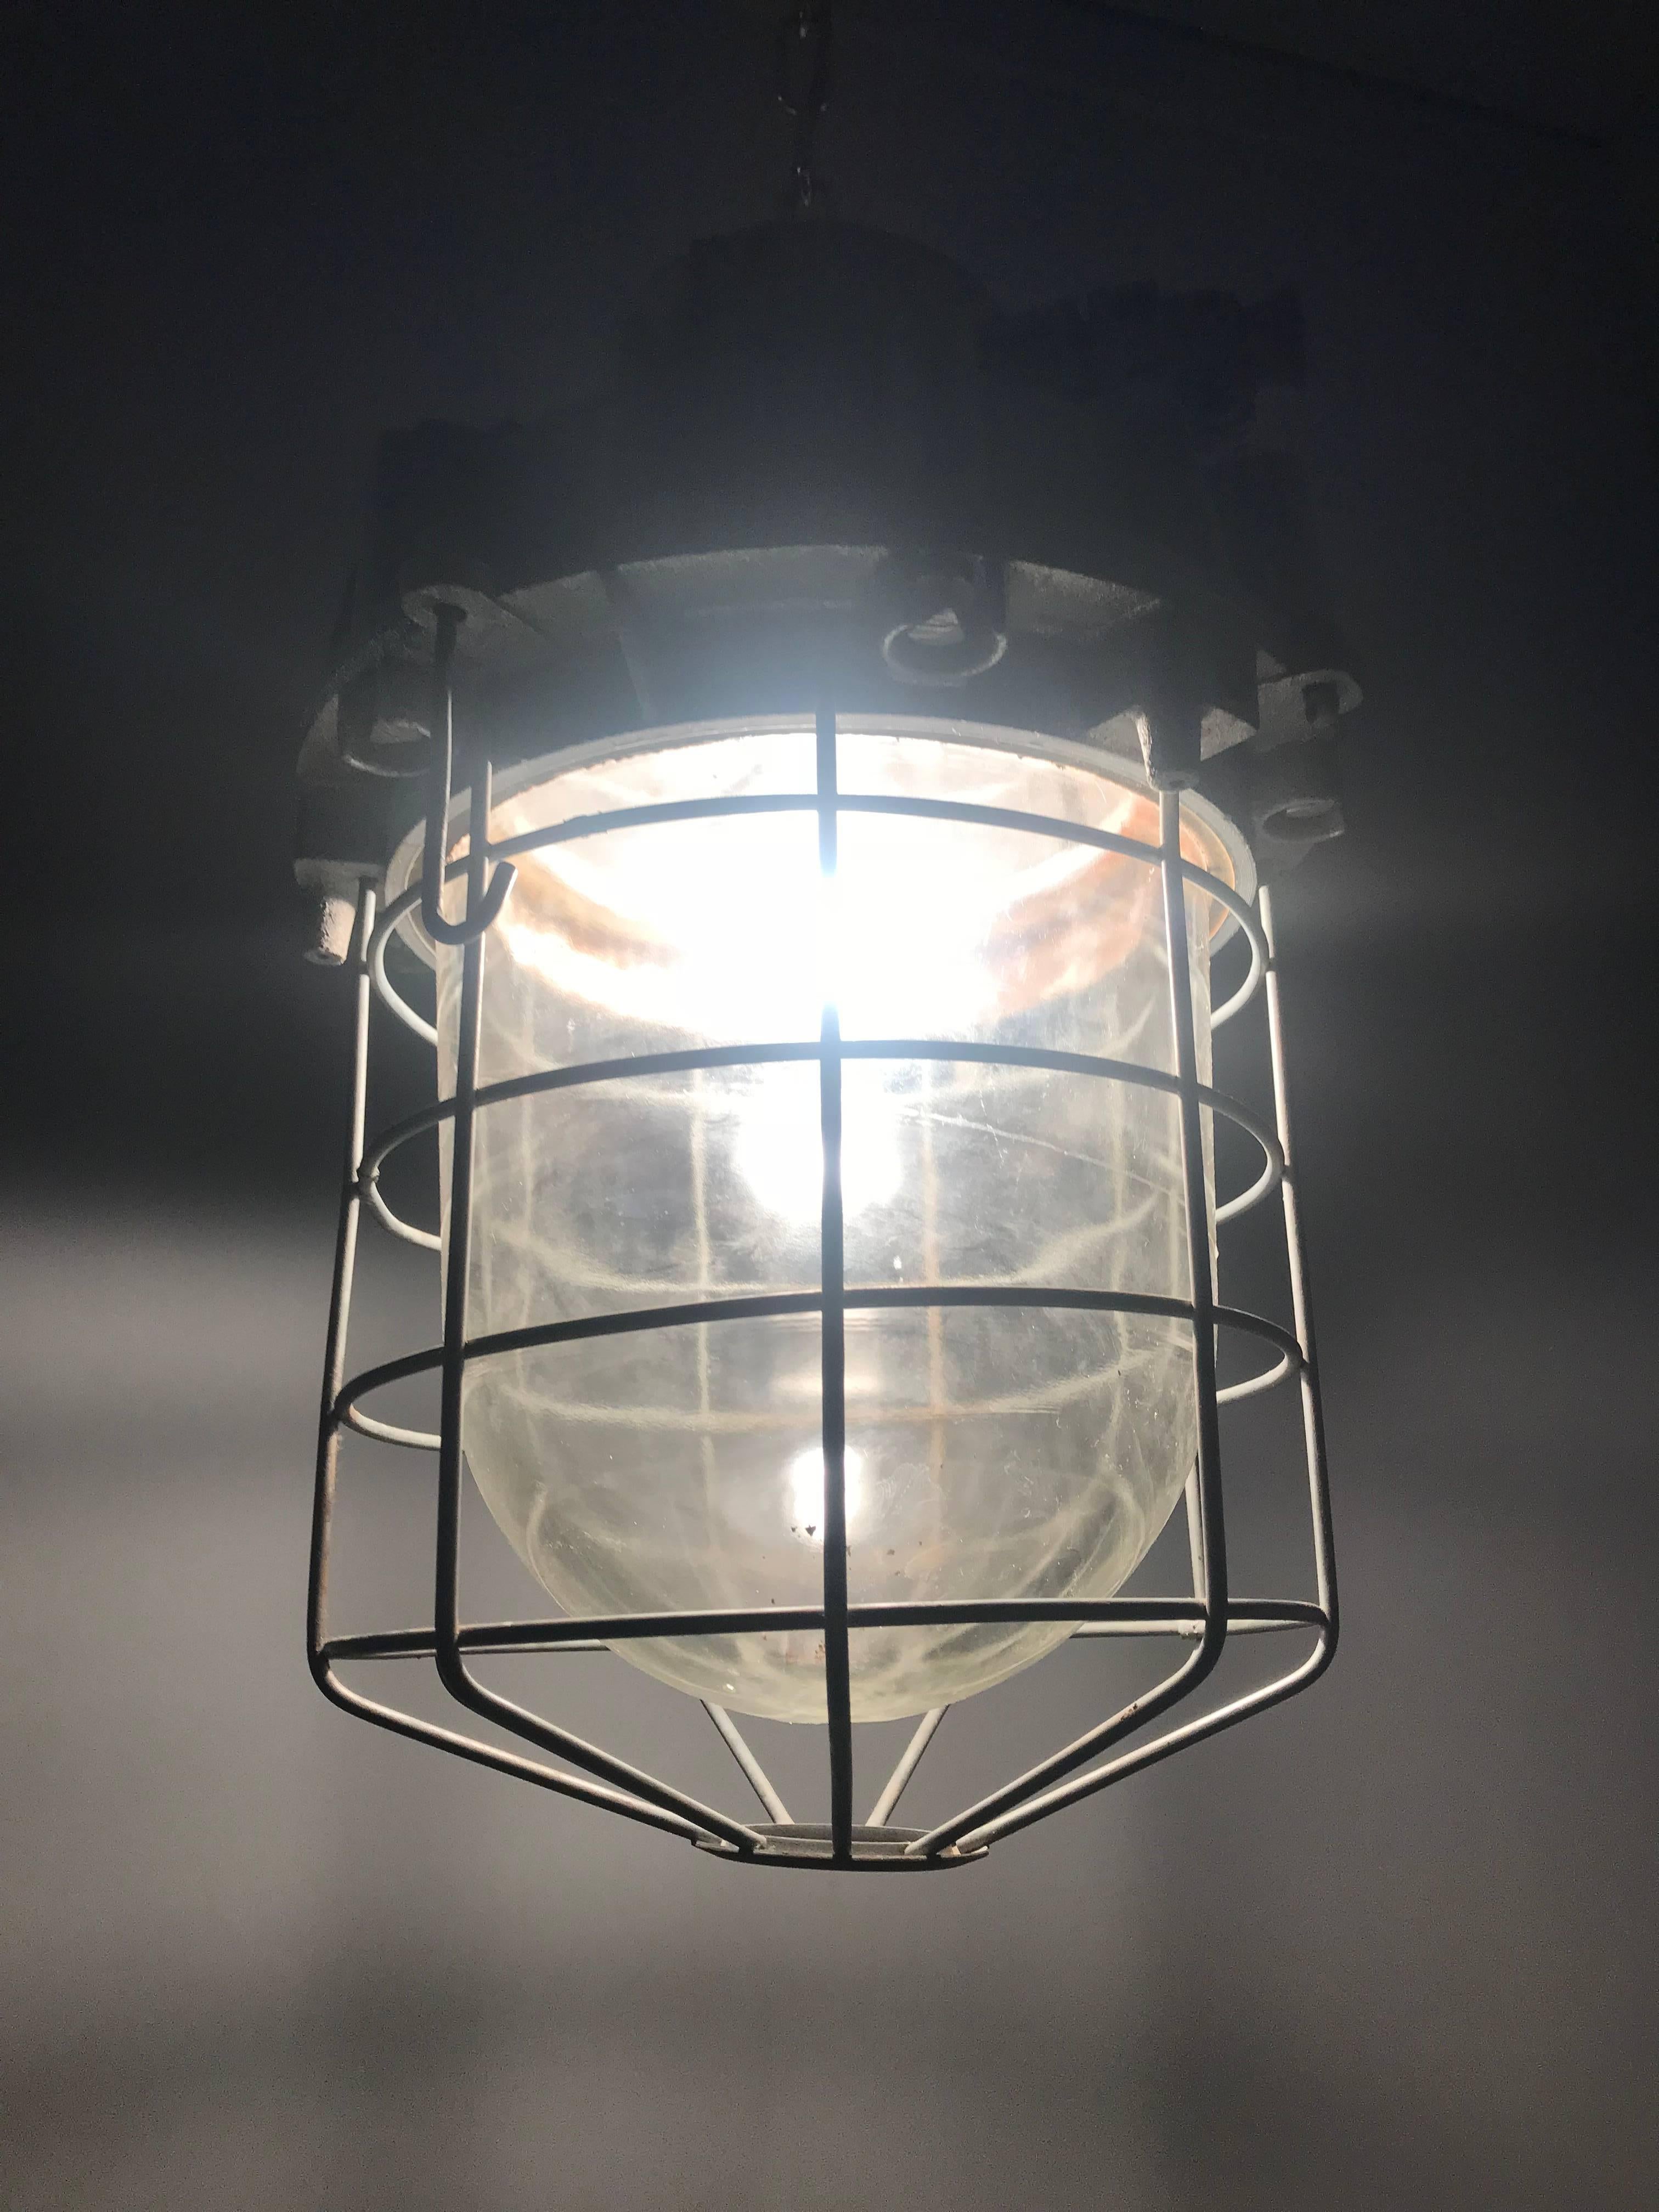 Large and Decorative 1920s Industrial Iron and Glass Caged Pendant/Light Fixture For Sale 1